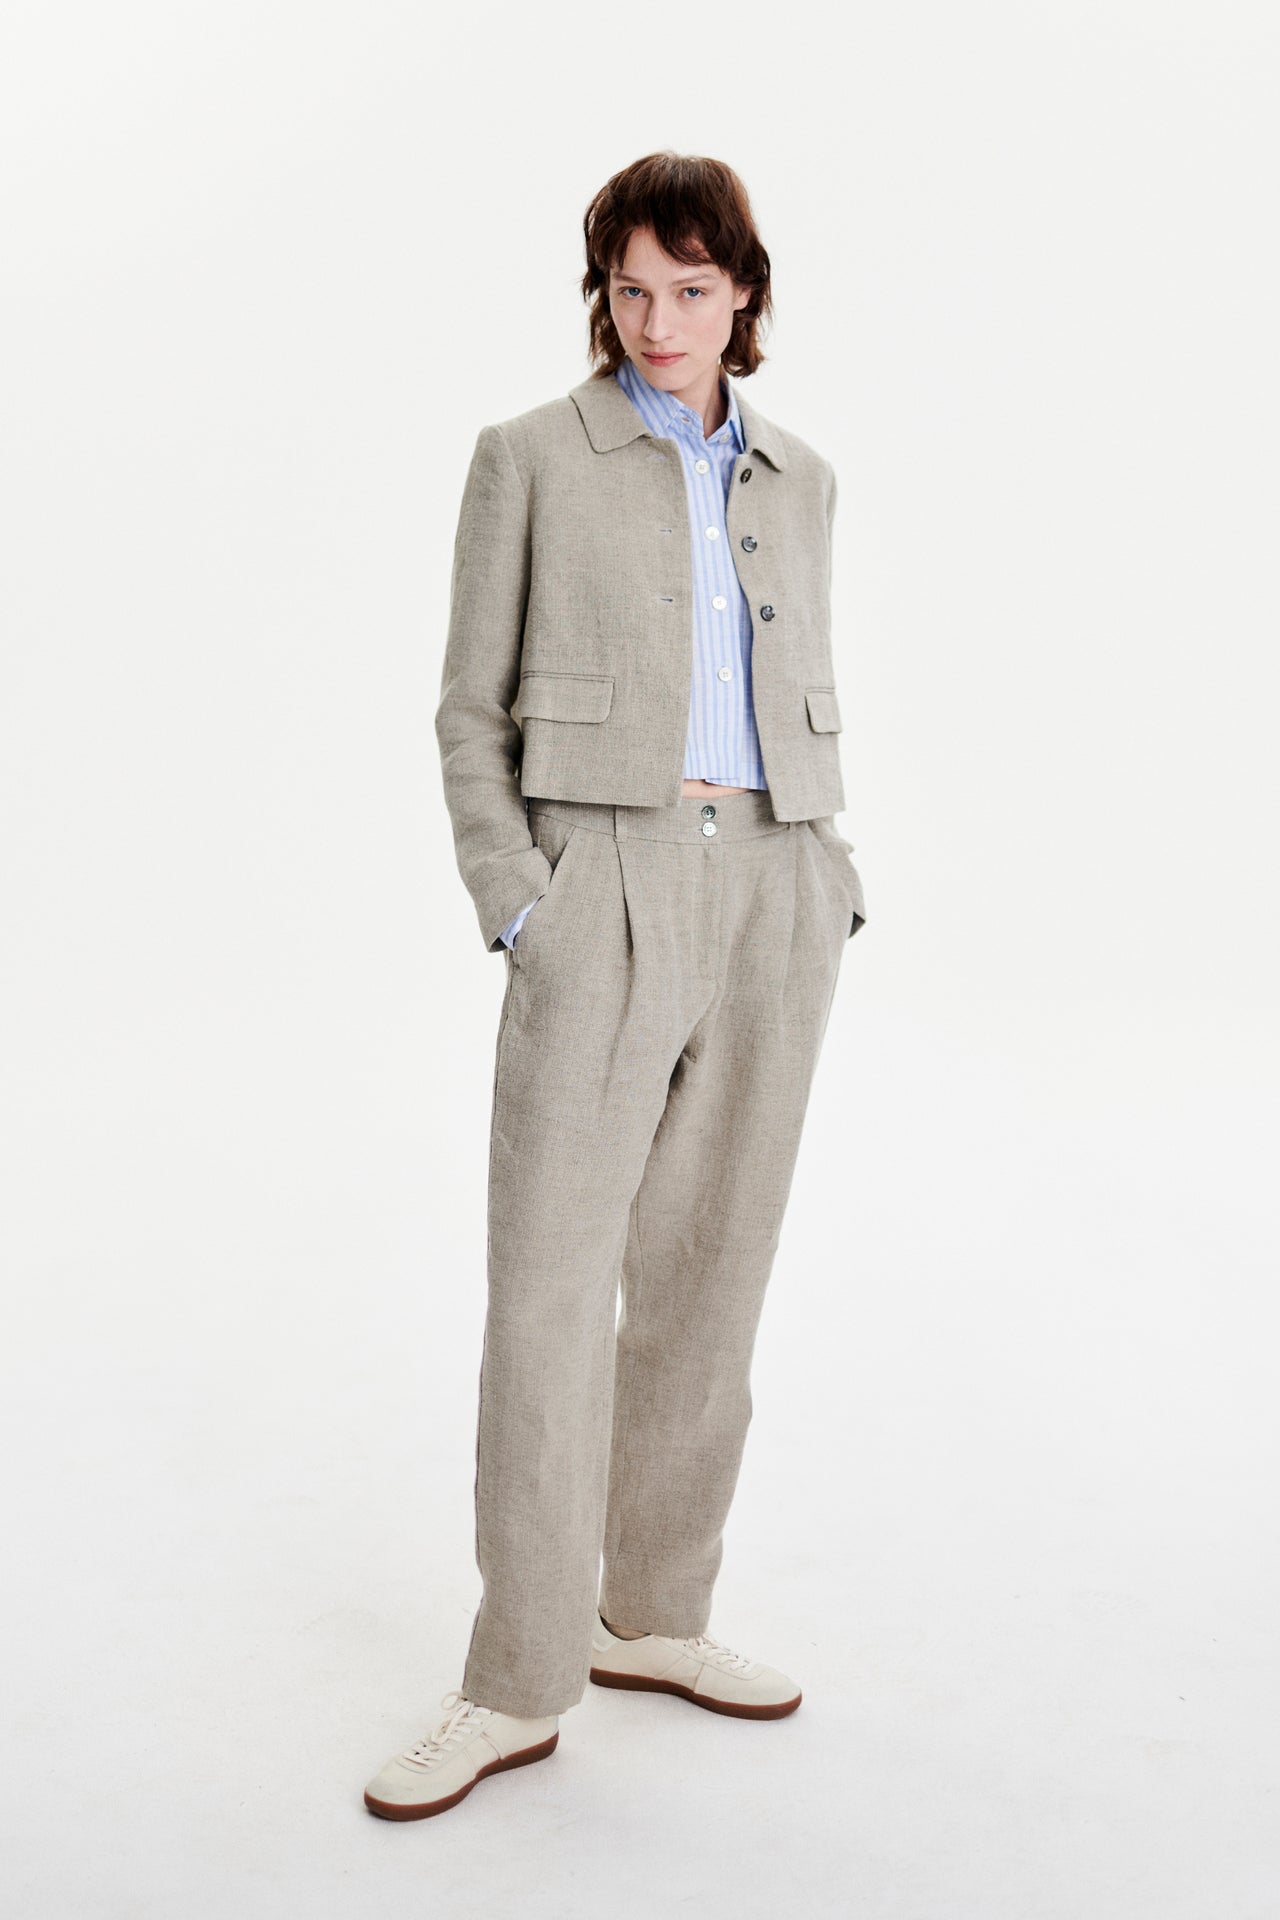 Cropped Jacket in a Beige Fluid and Structured Italian Linen Crepe